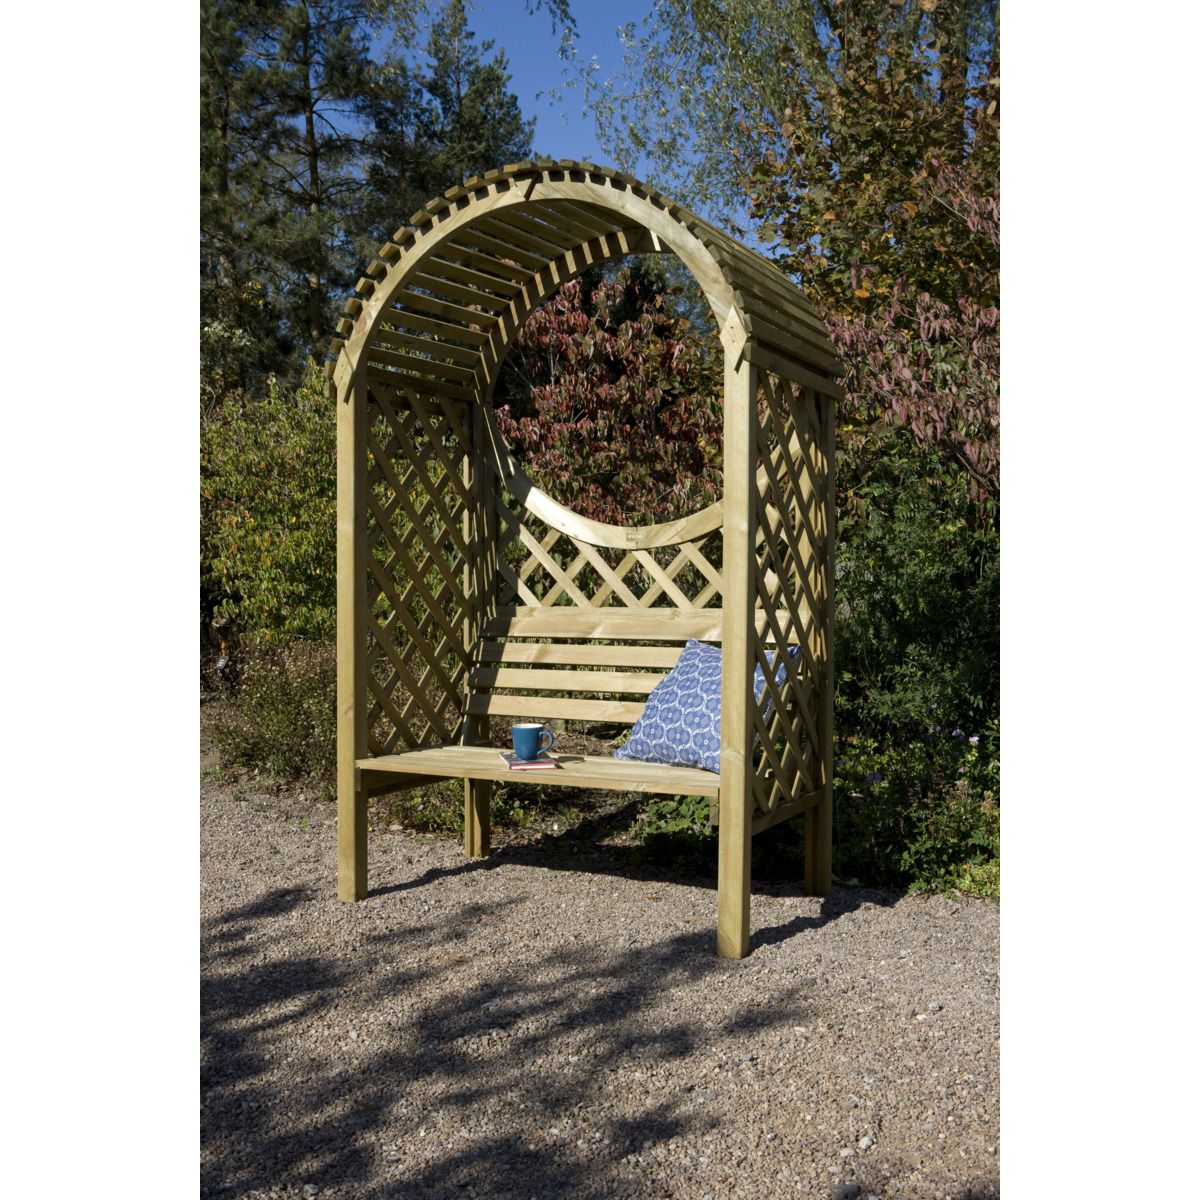 Image of Rowlinson Keswick Curved Roof Trellis Garden Arbour - 1320 x 800mm